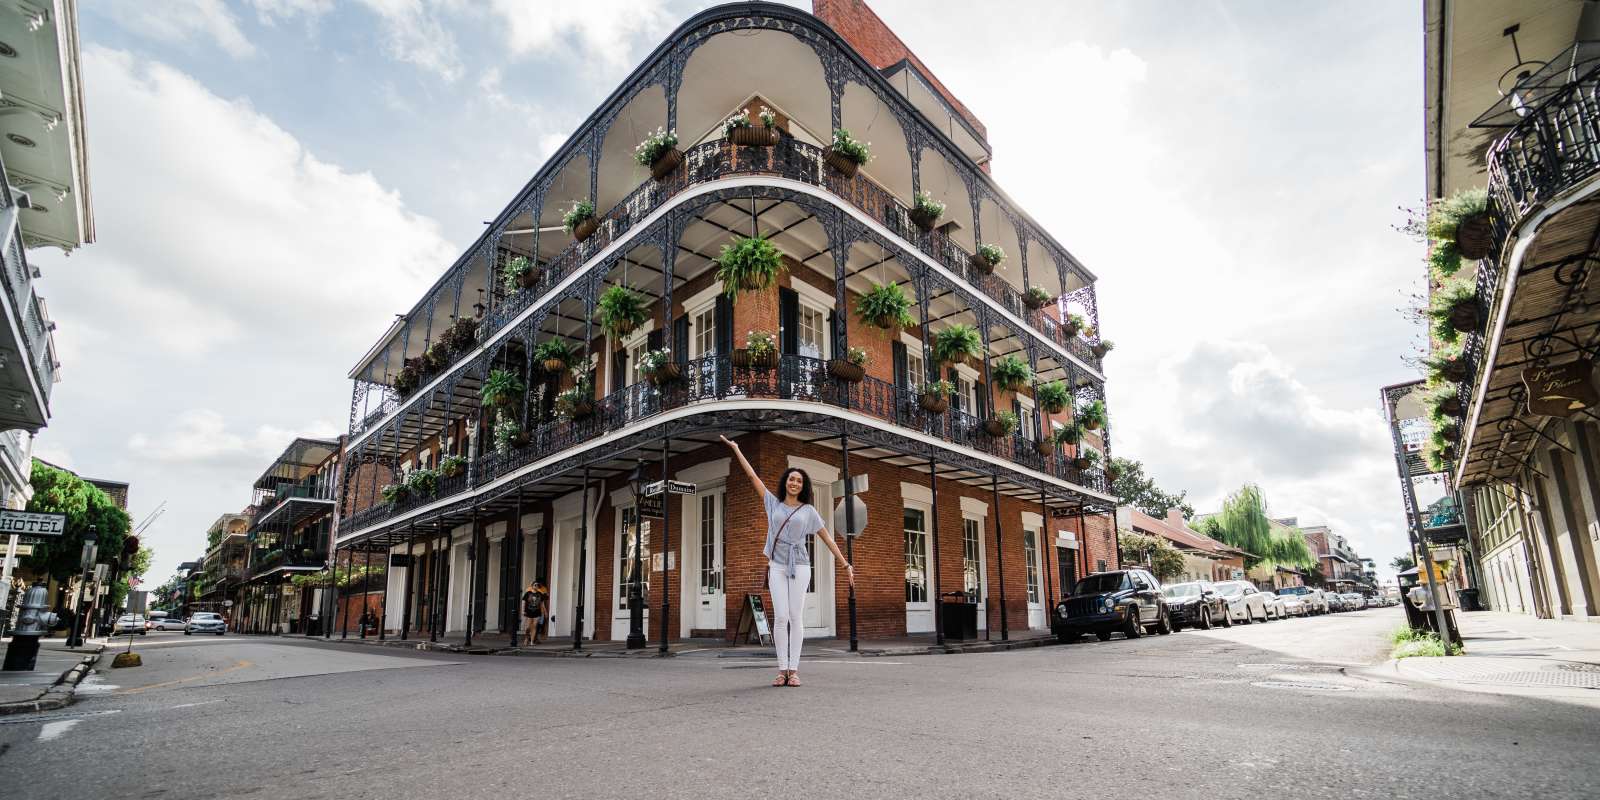 Exploring New Orleans’ French Quarter